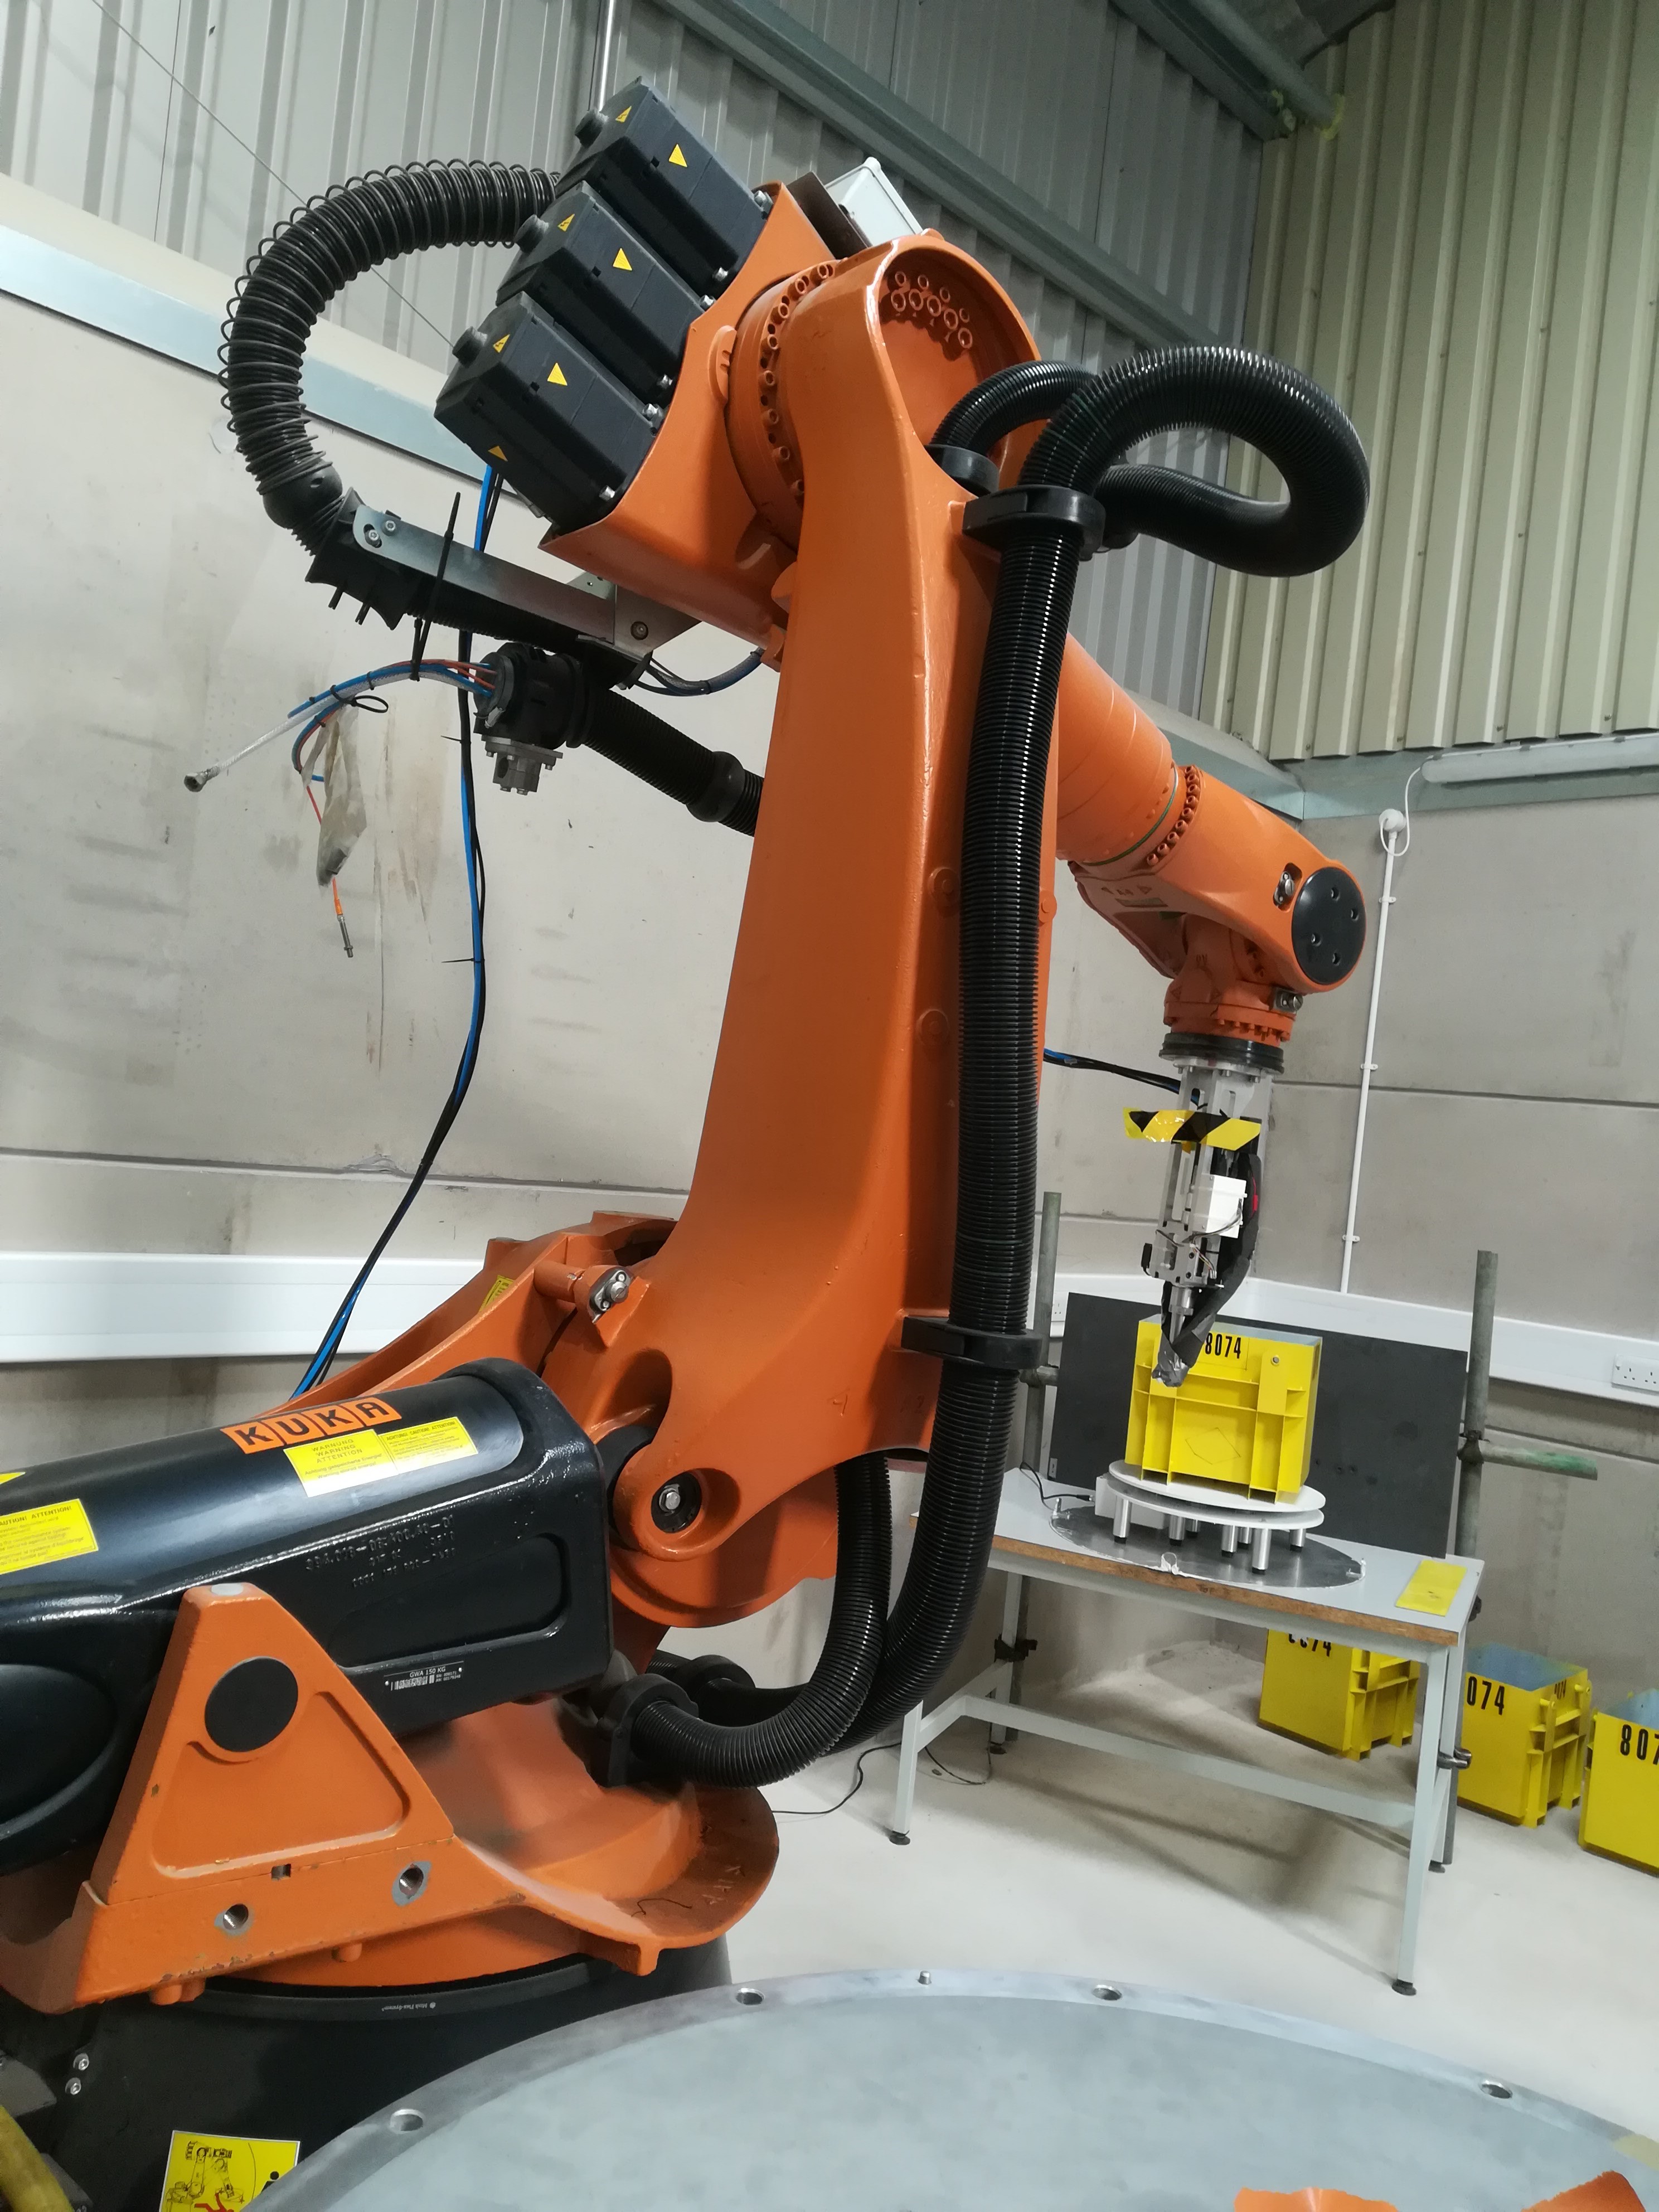 A KUKA robot arm in front of a waste container